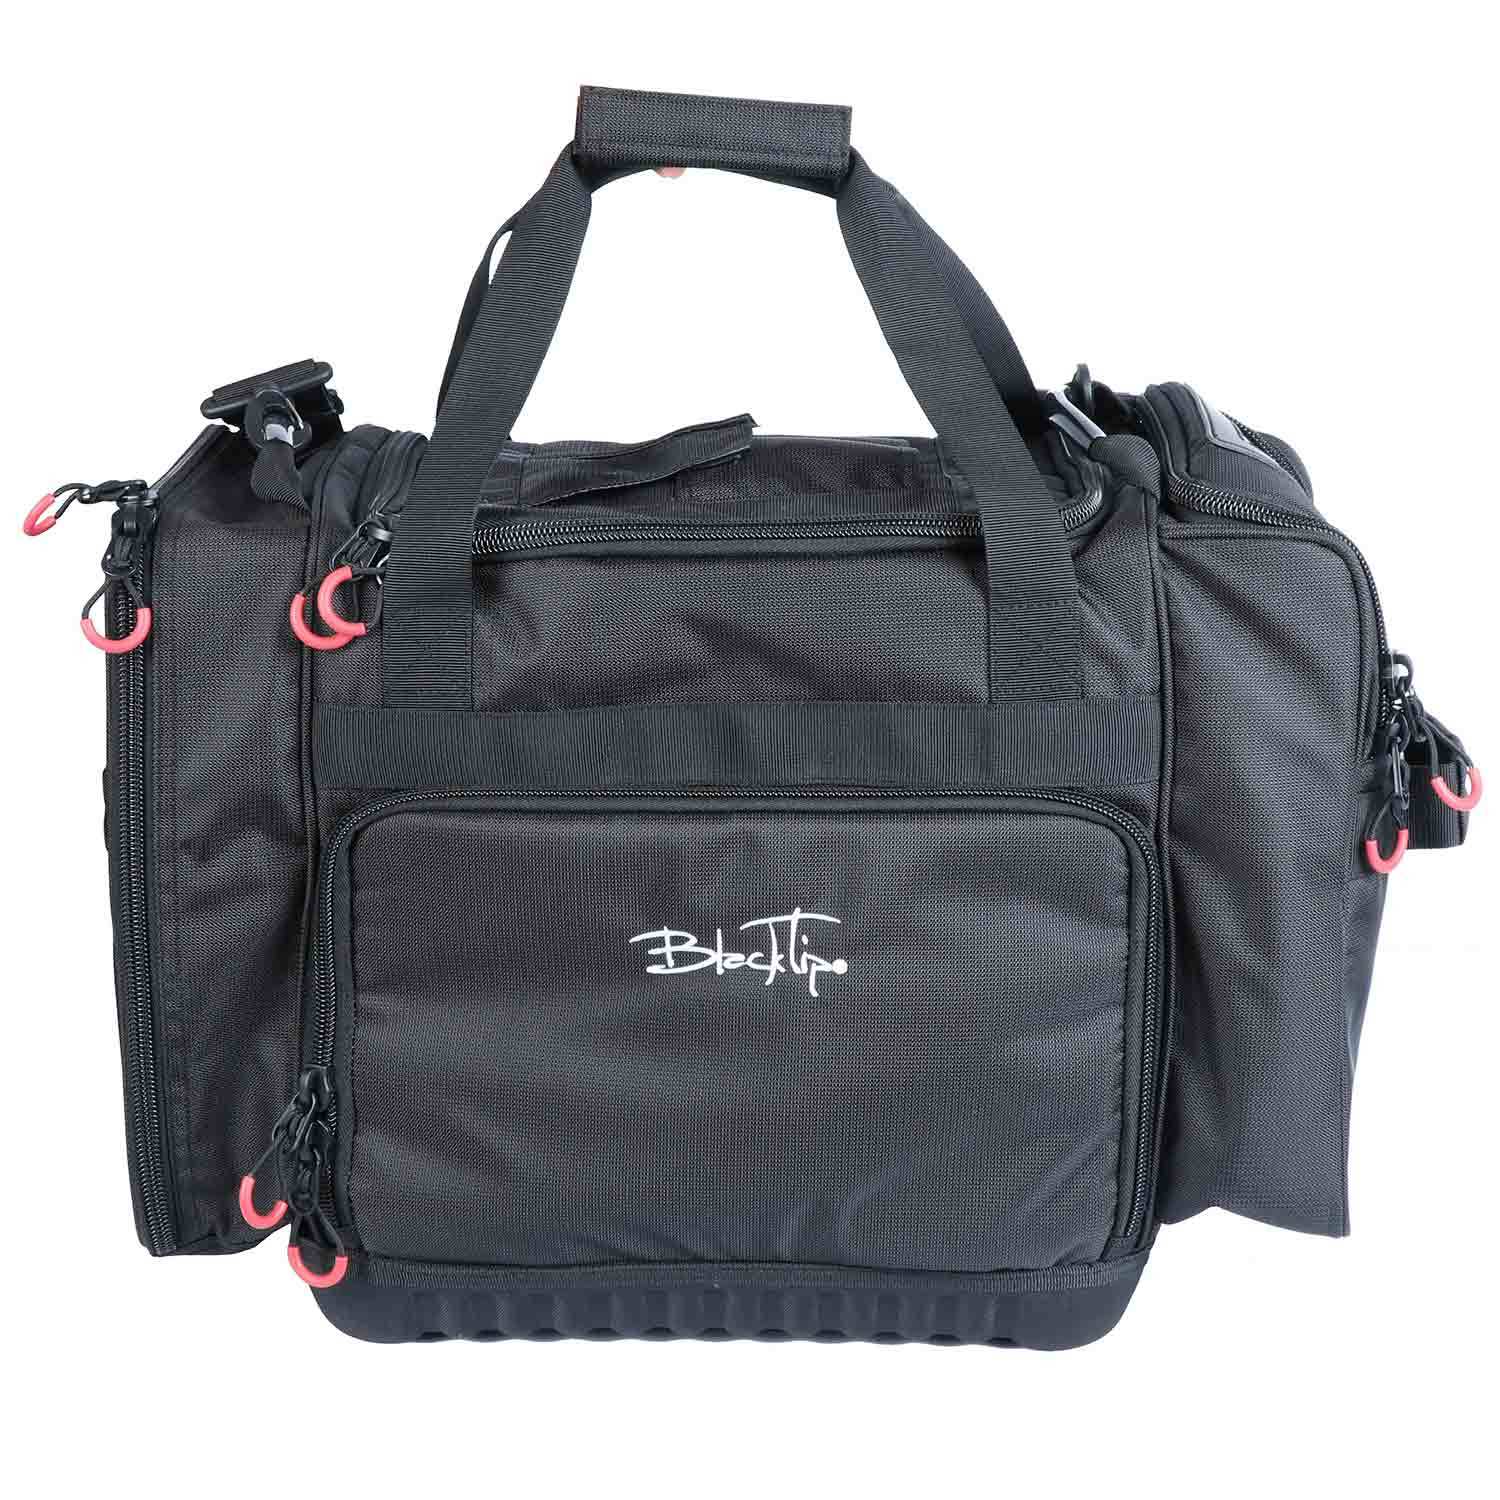 BLACKTIP Large Deluxe Offshore Tackle Bag